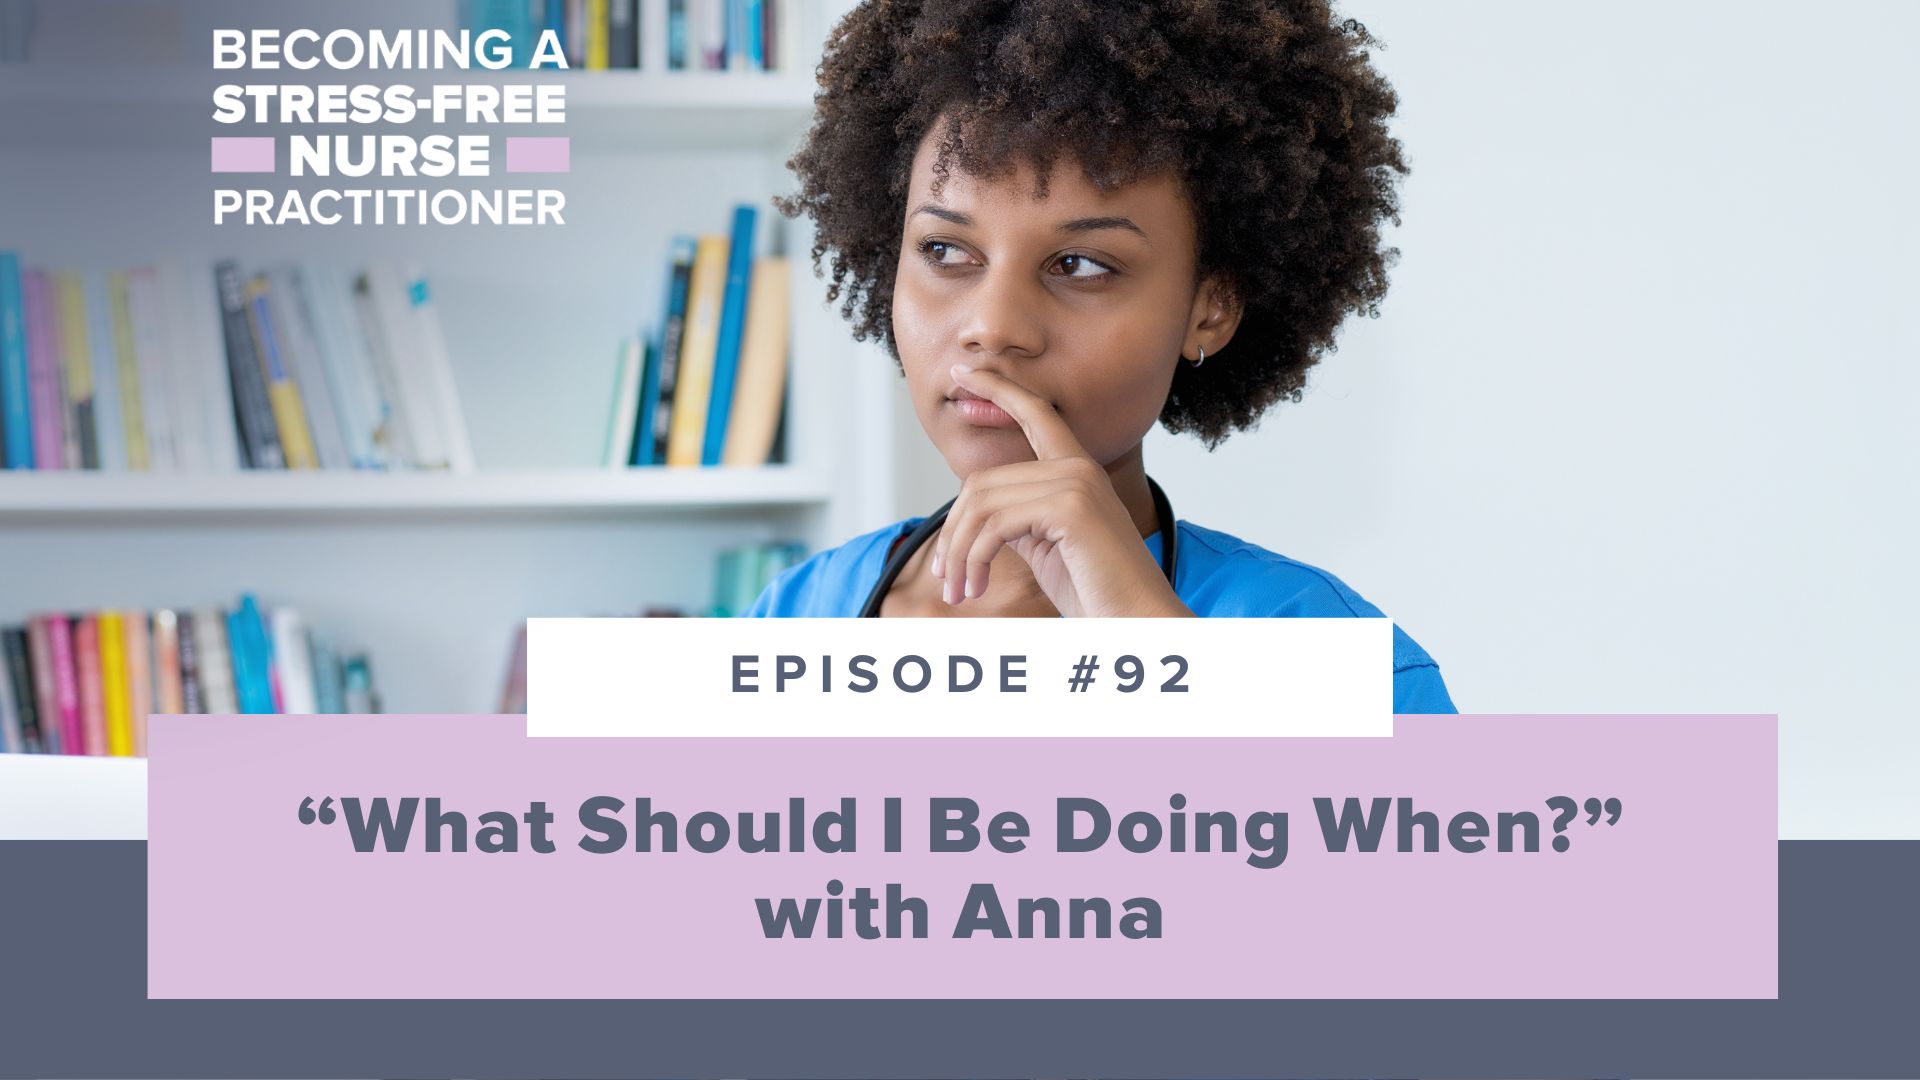 SMNP Blog - Ep #92: “What Should I Be Doing When?” with Anna